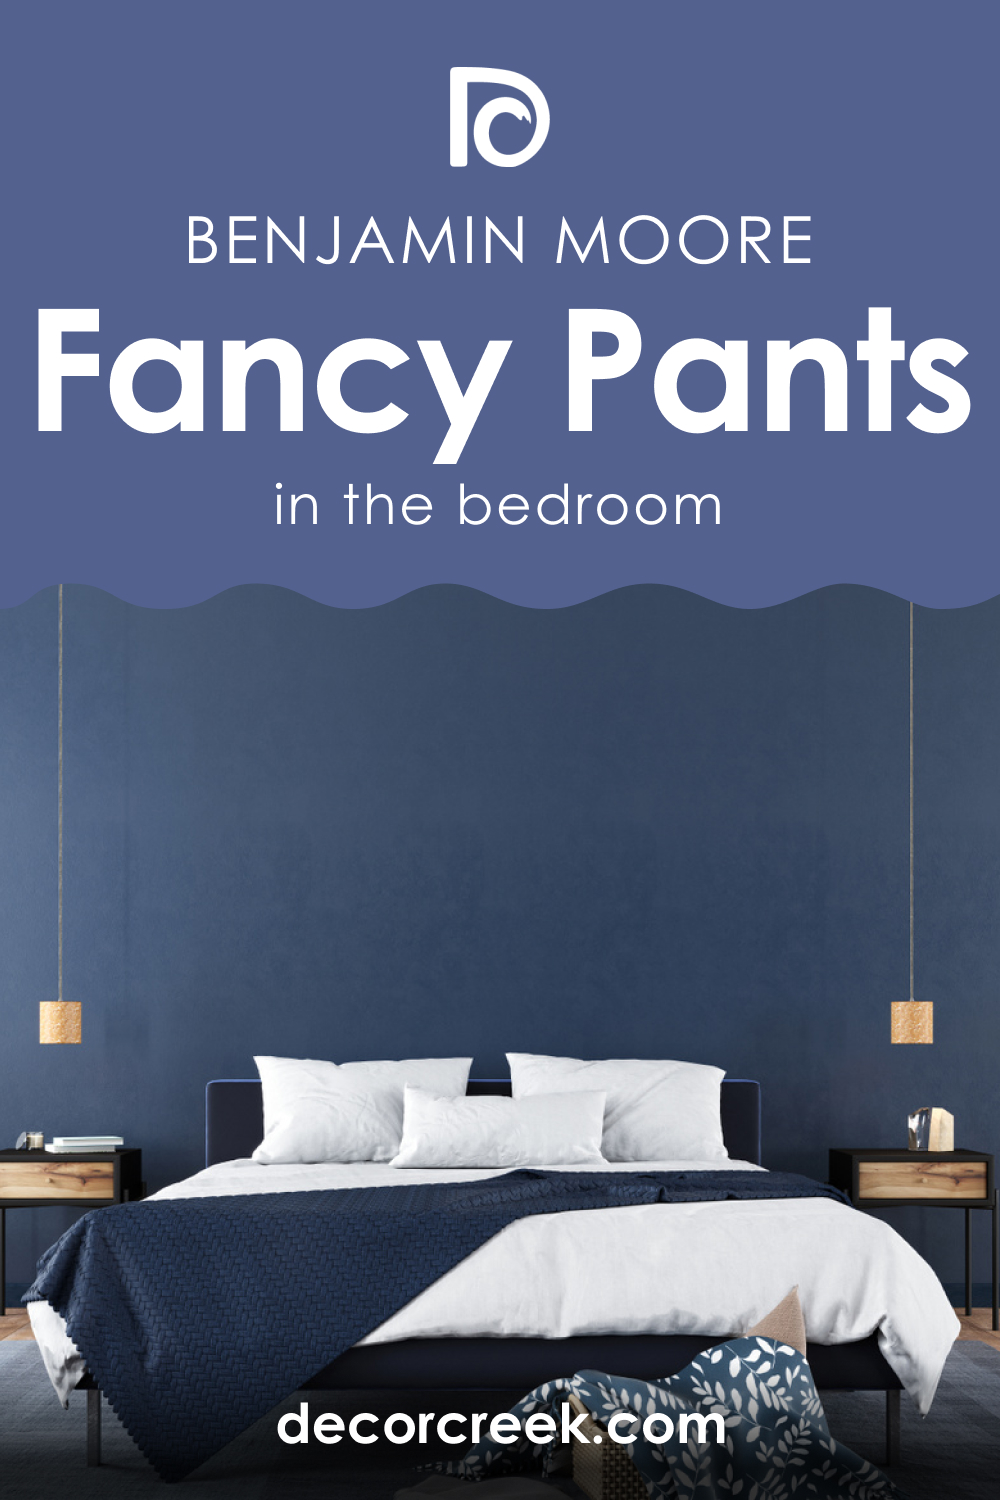 How to Use Fancy Pants CSP-525 in the Bedroom?